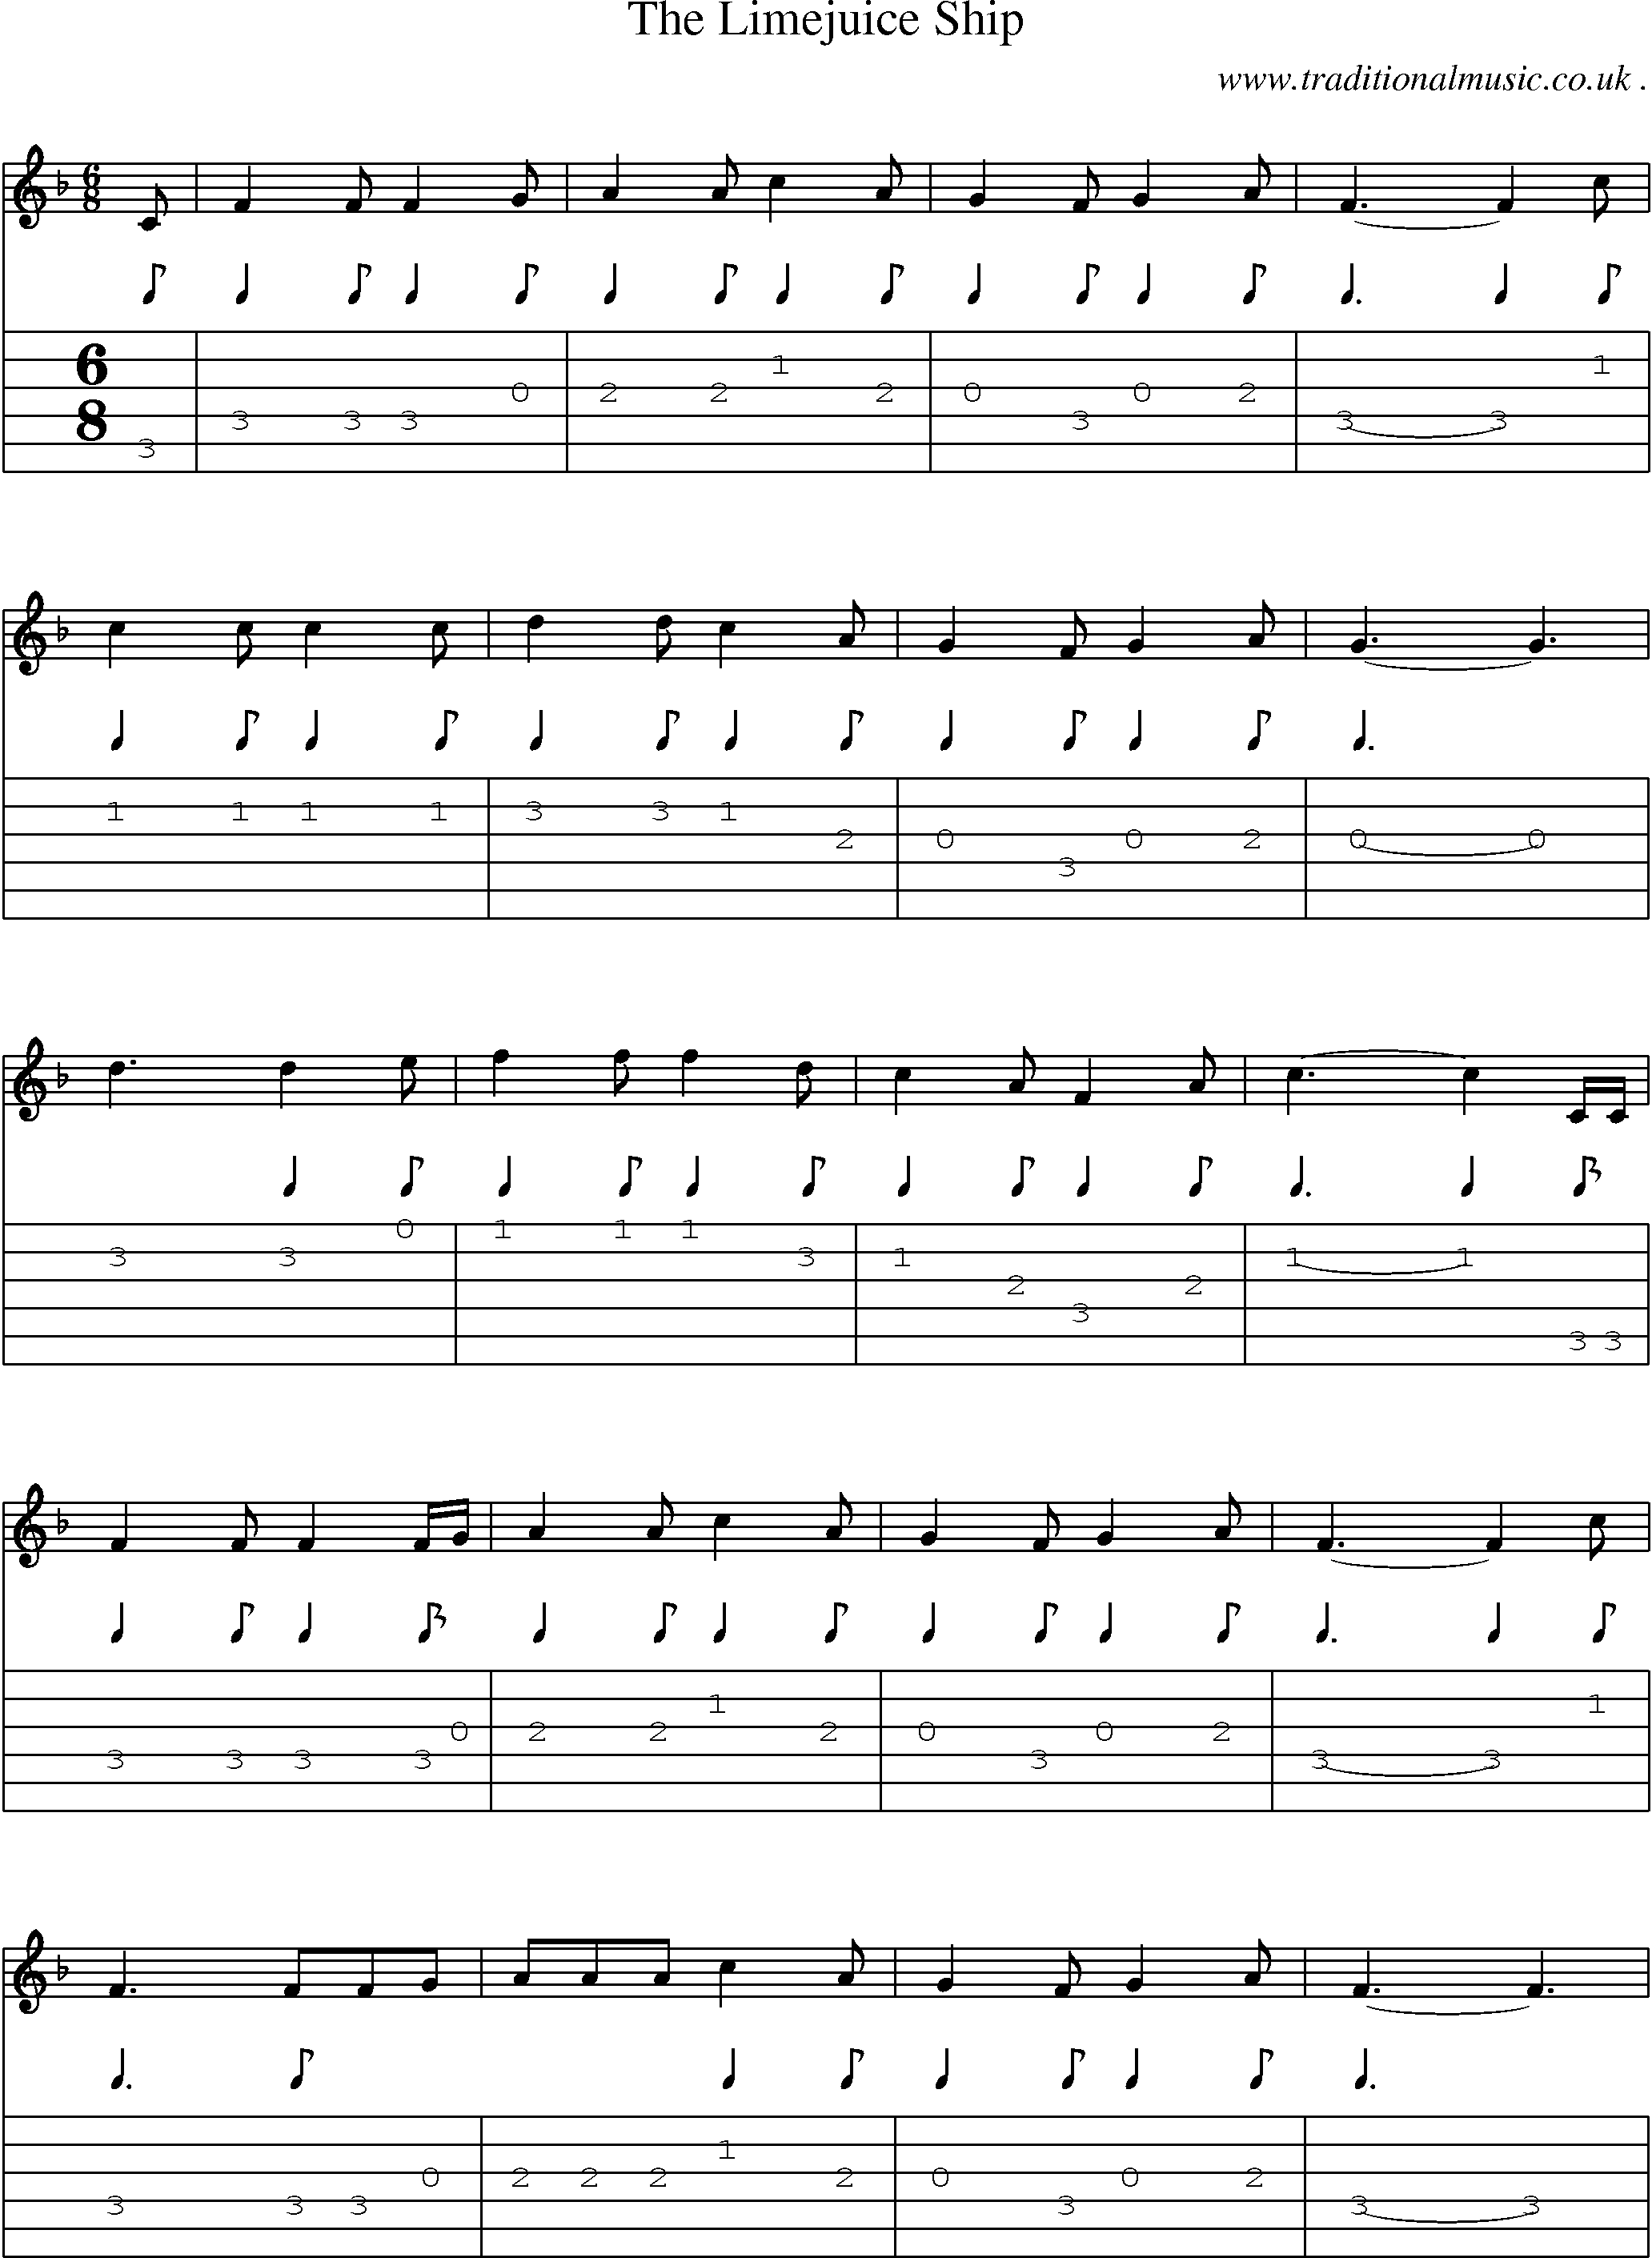 Sheet-Music and Guitar Tabs for The Limejuice Ship